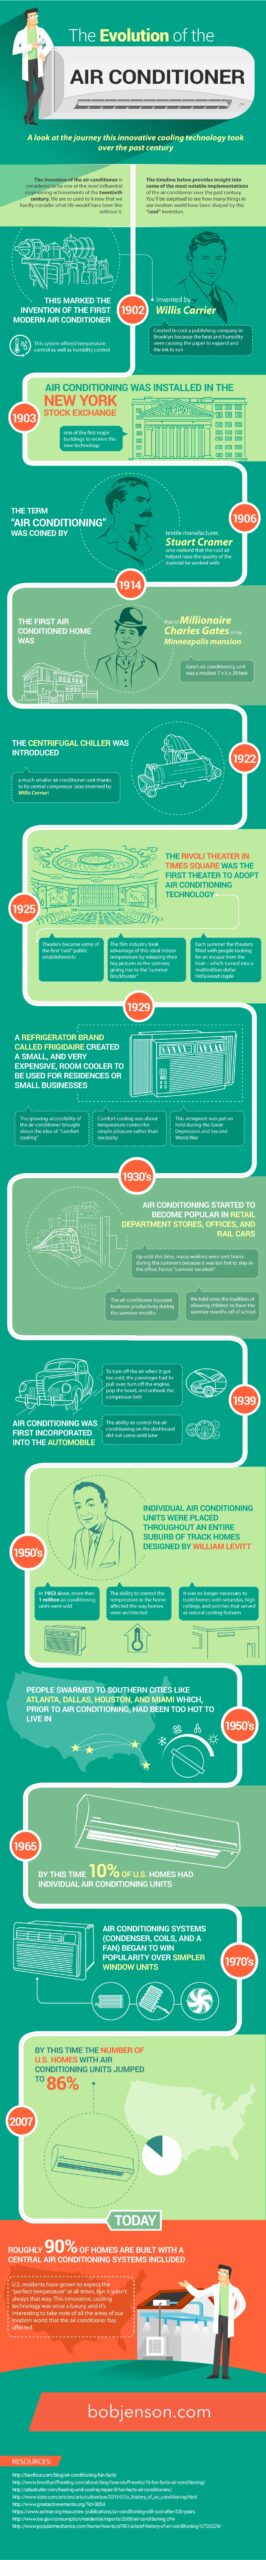 Infographic that shows the evolution of air conditioning throughout history